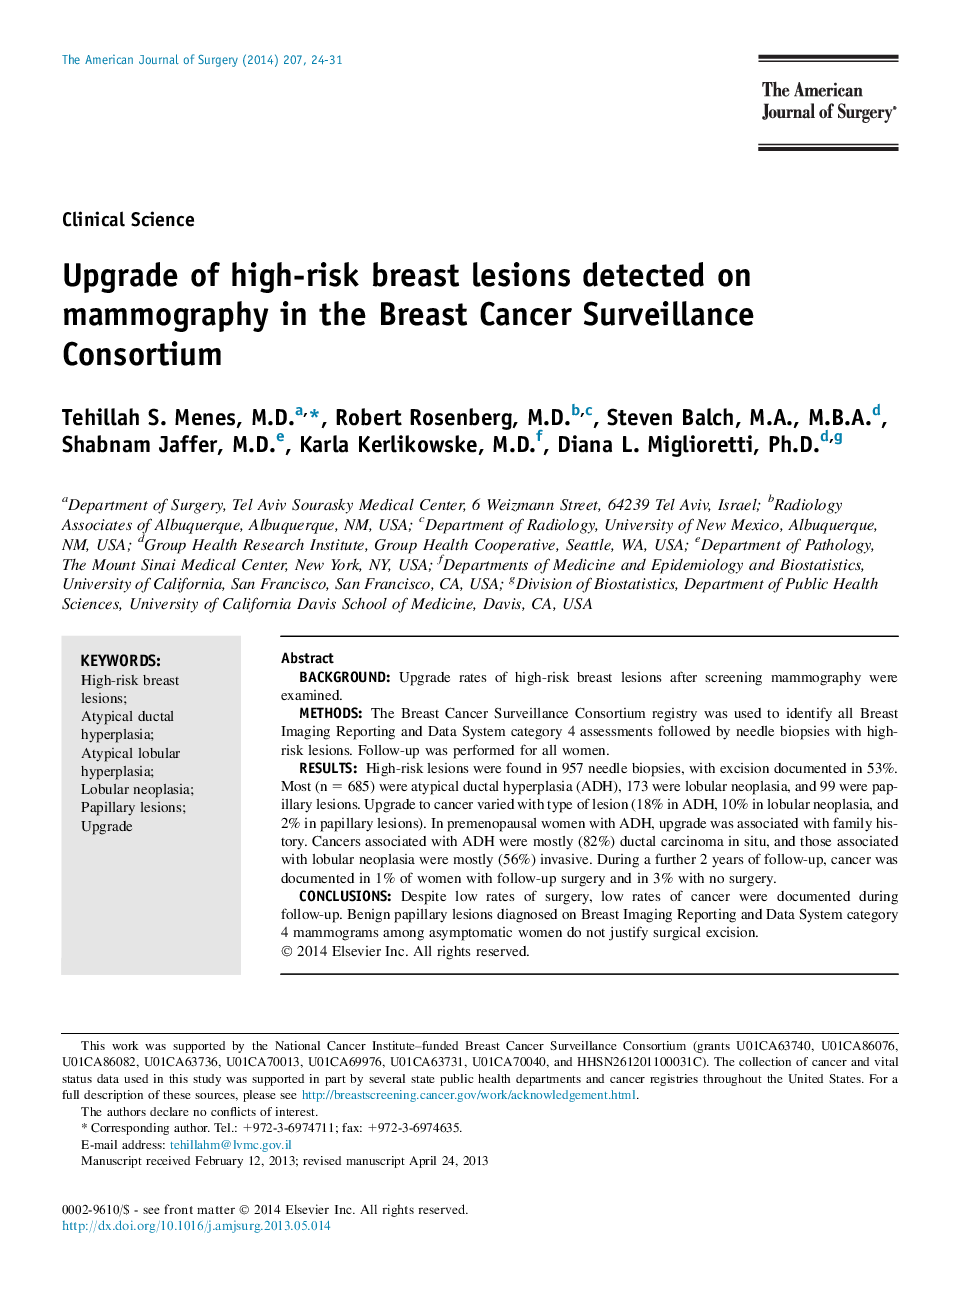 Upgrade of high-risk breast lesions detected on mammography in the Breast Cancer Surveillance Consortium 